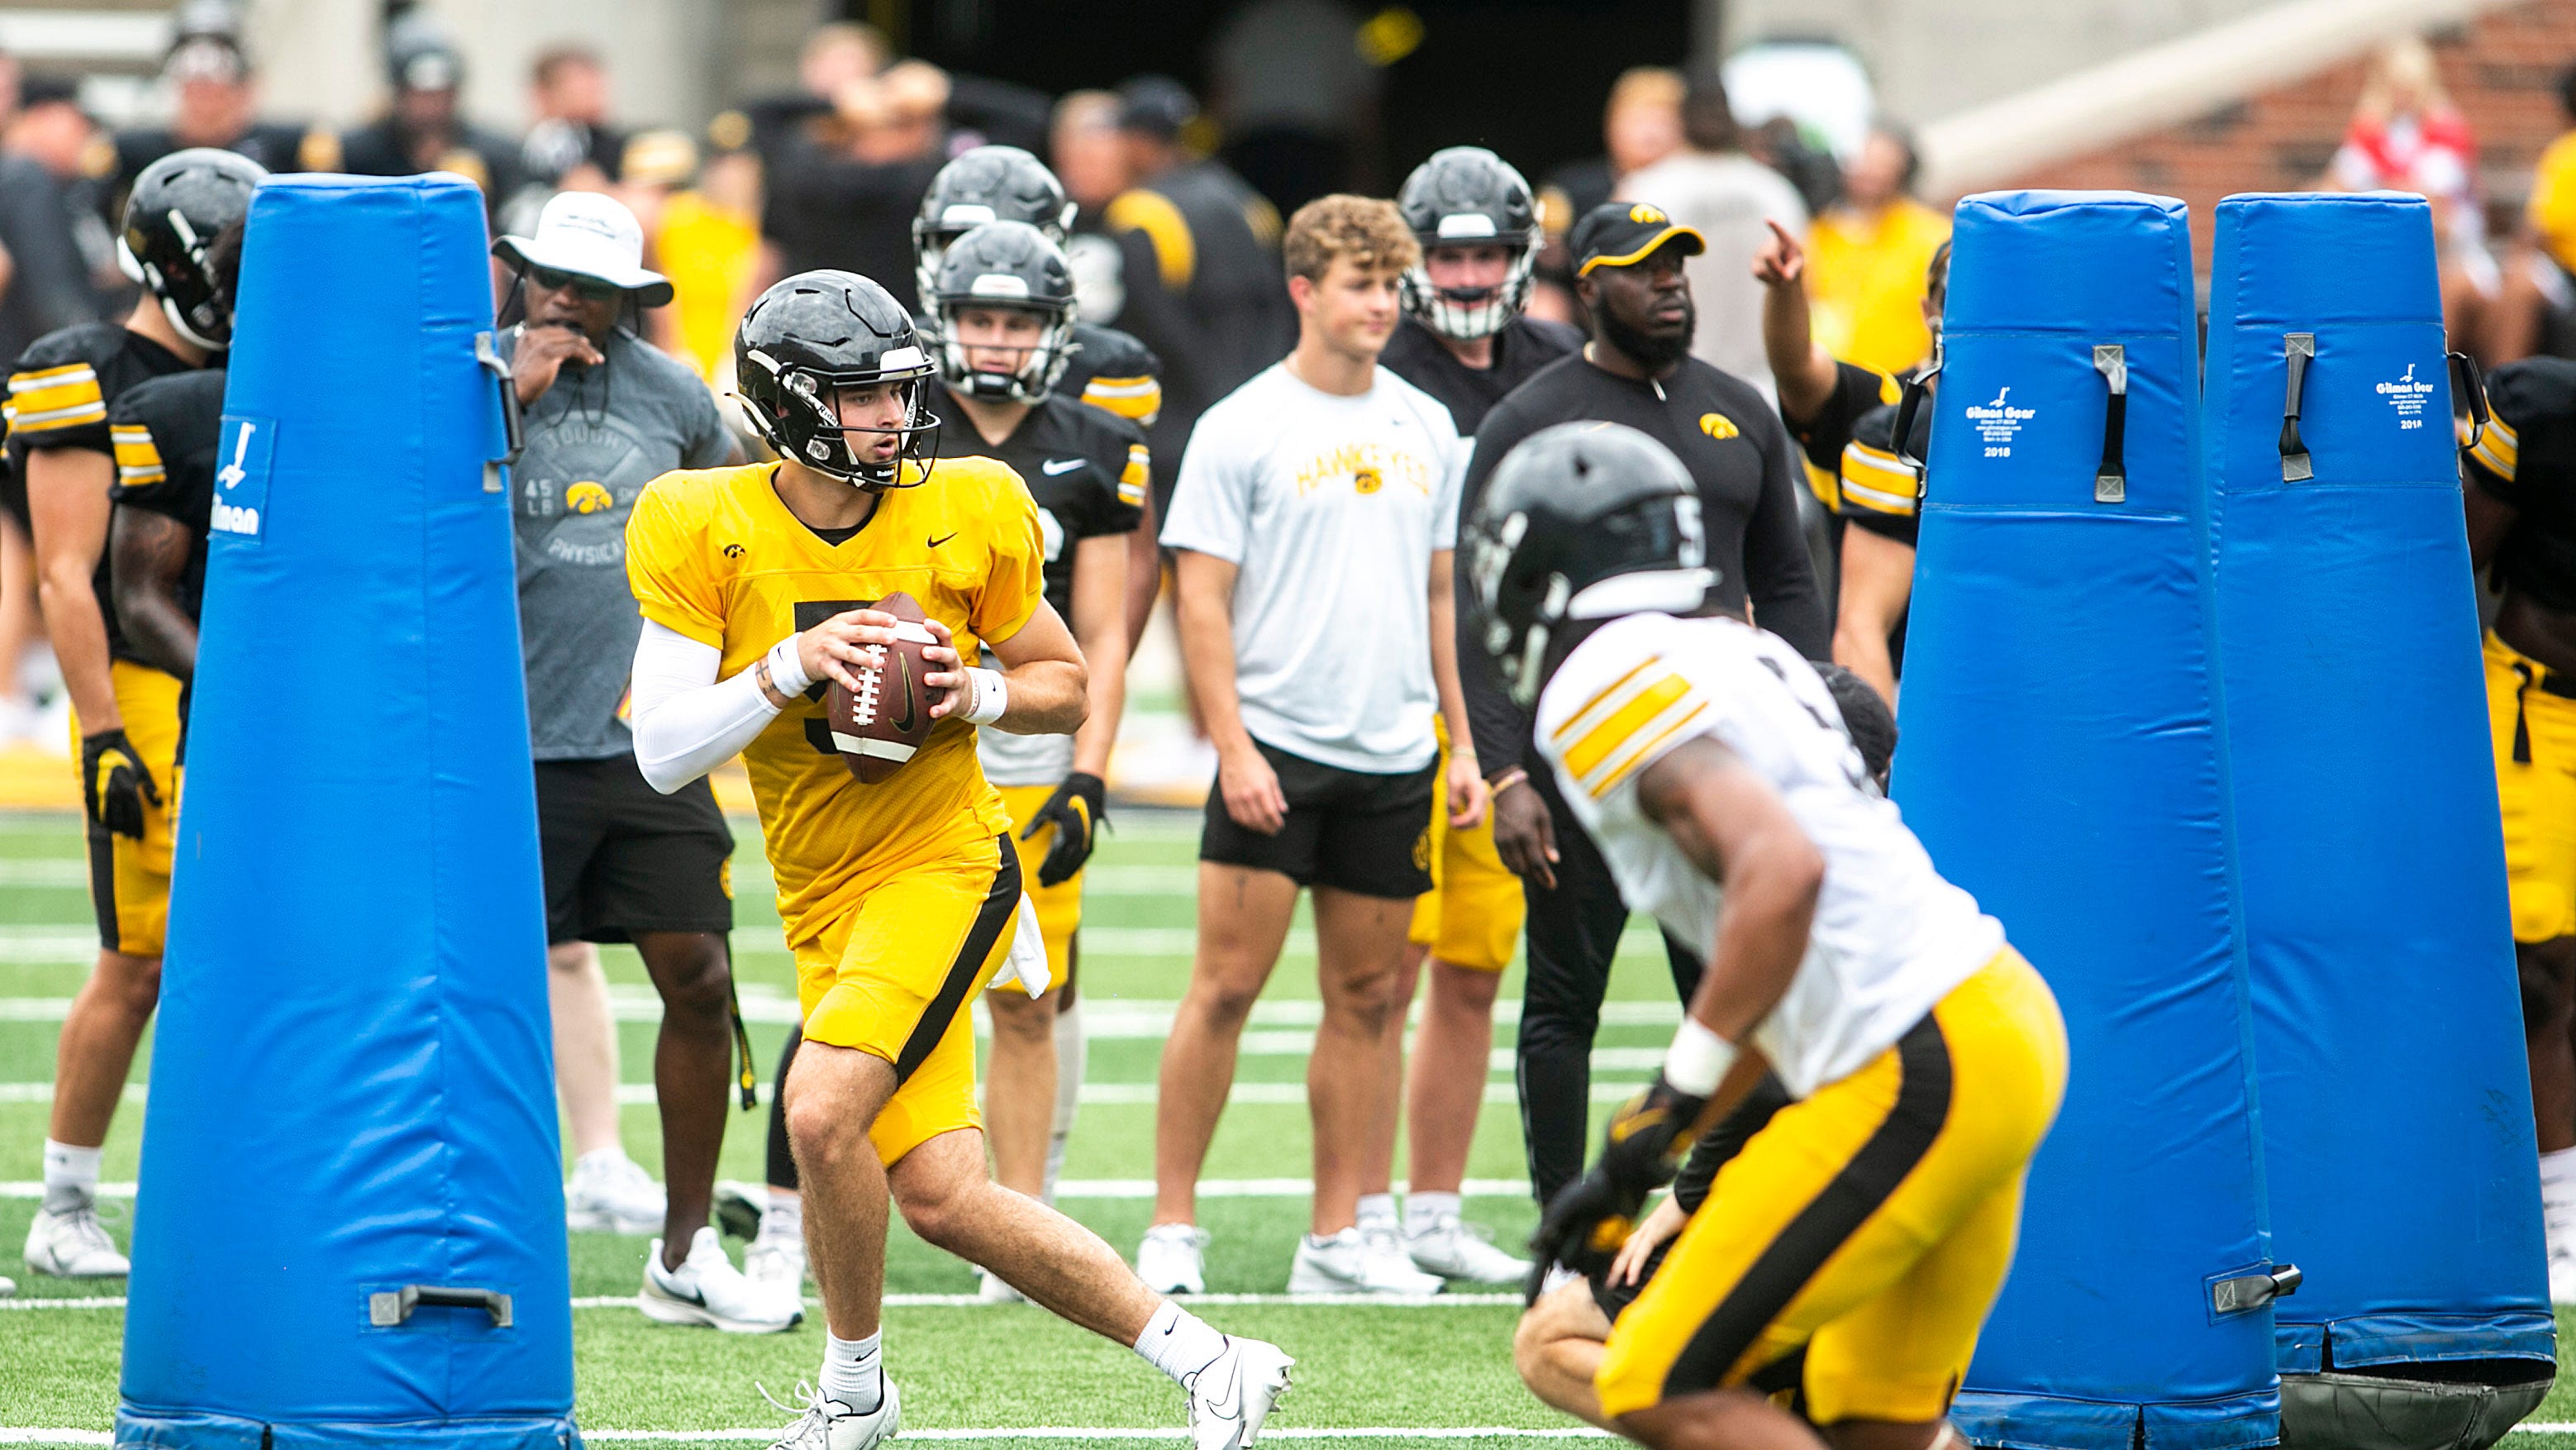 joe-labas-potential-provides-intrigue-for-iowa-football-fans